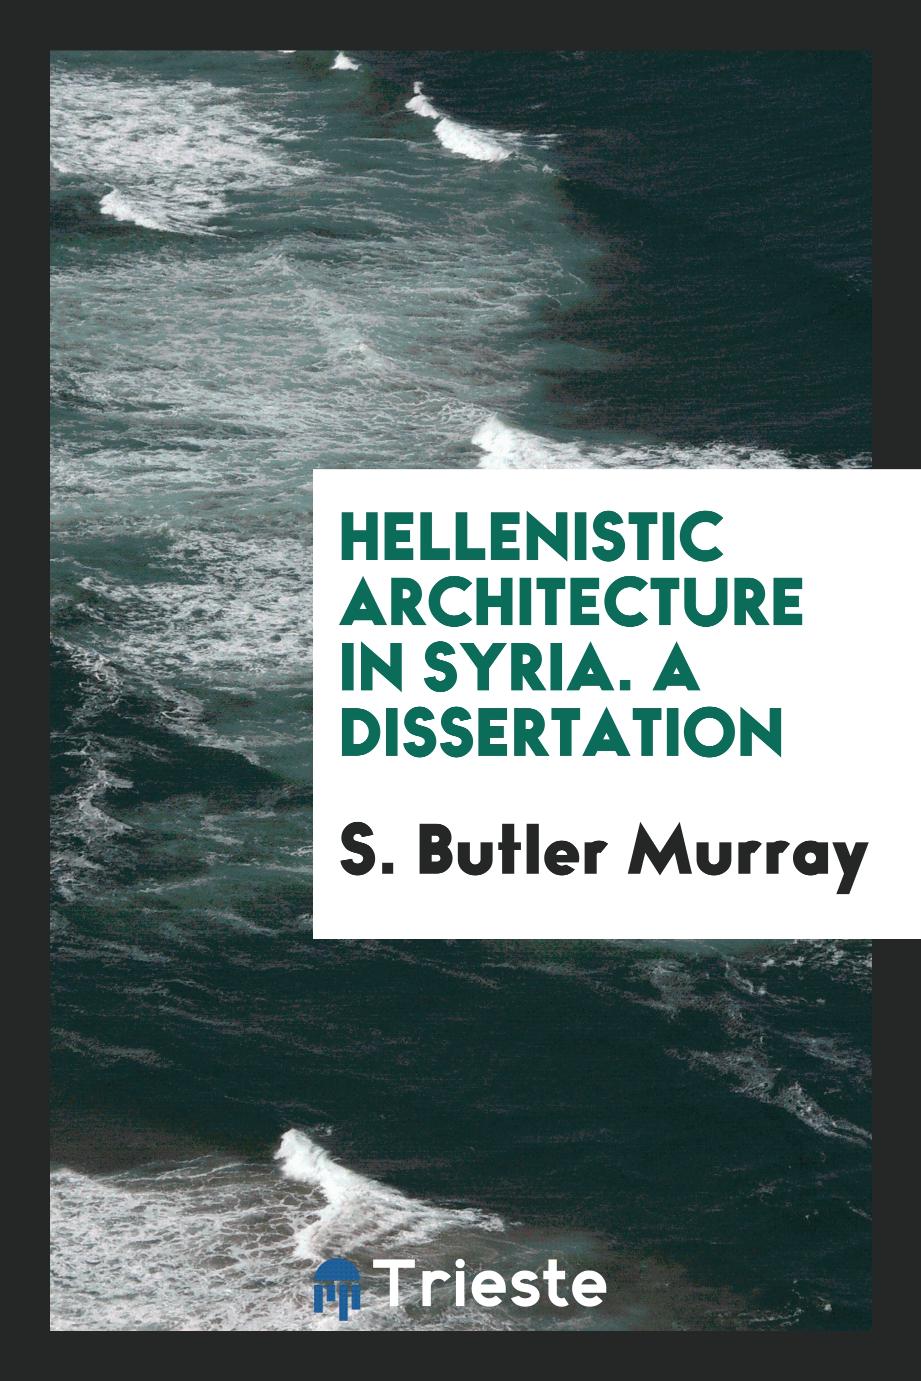 Hellenistic Architecture in Syria. A dissertation